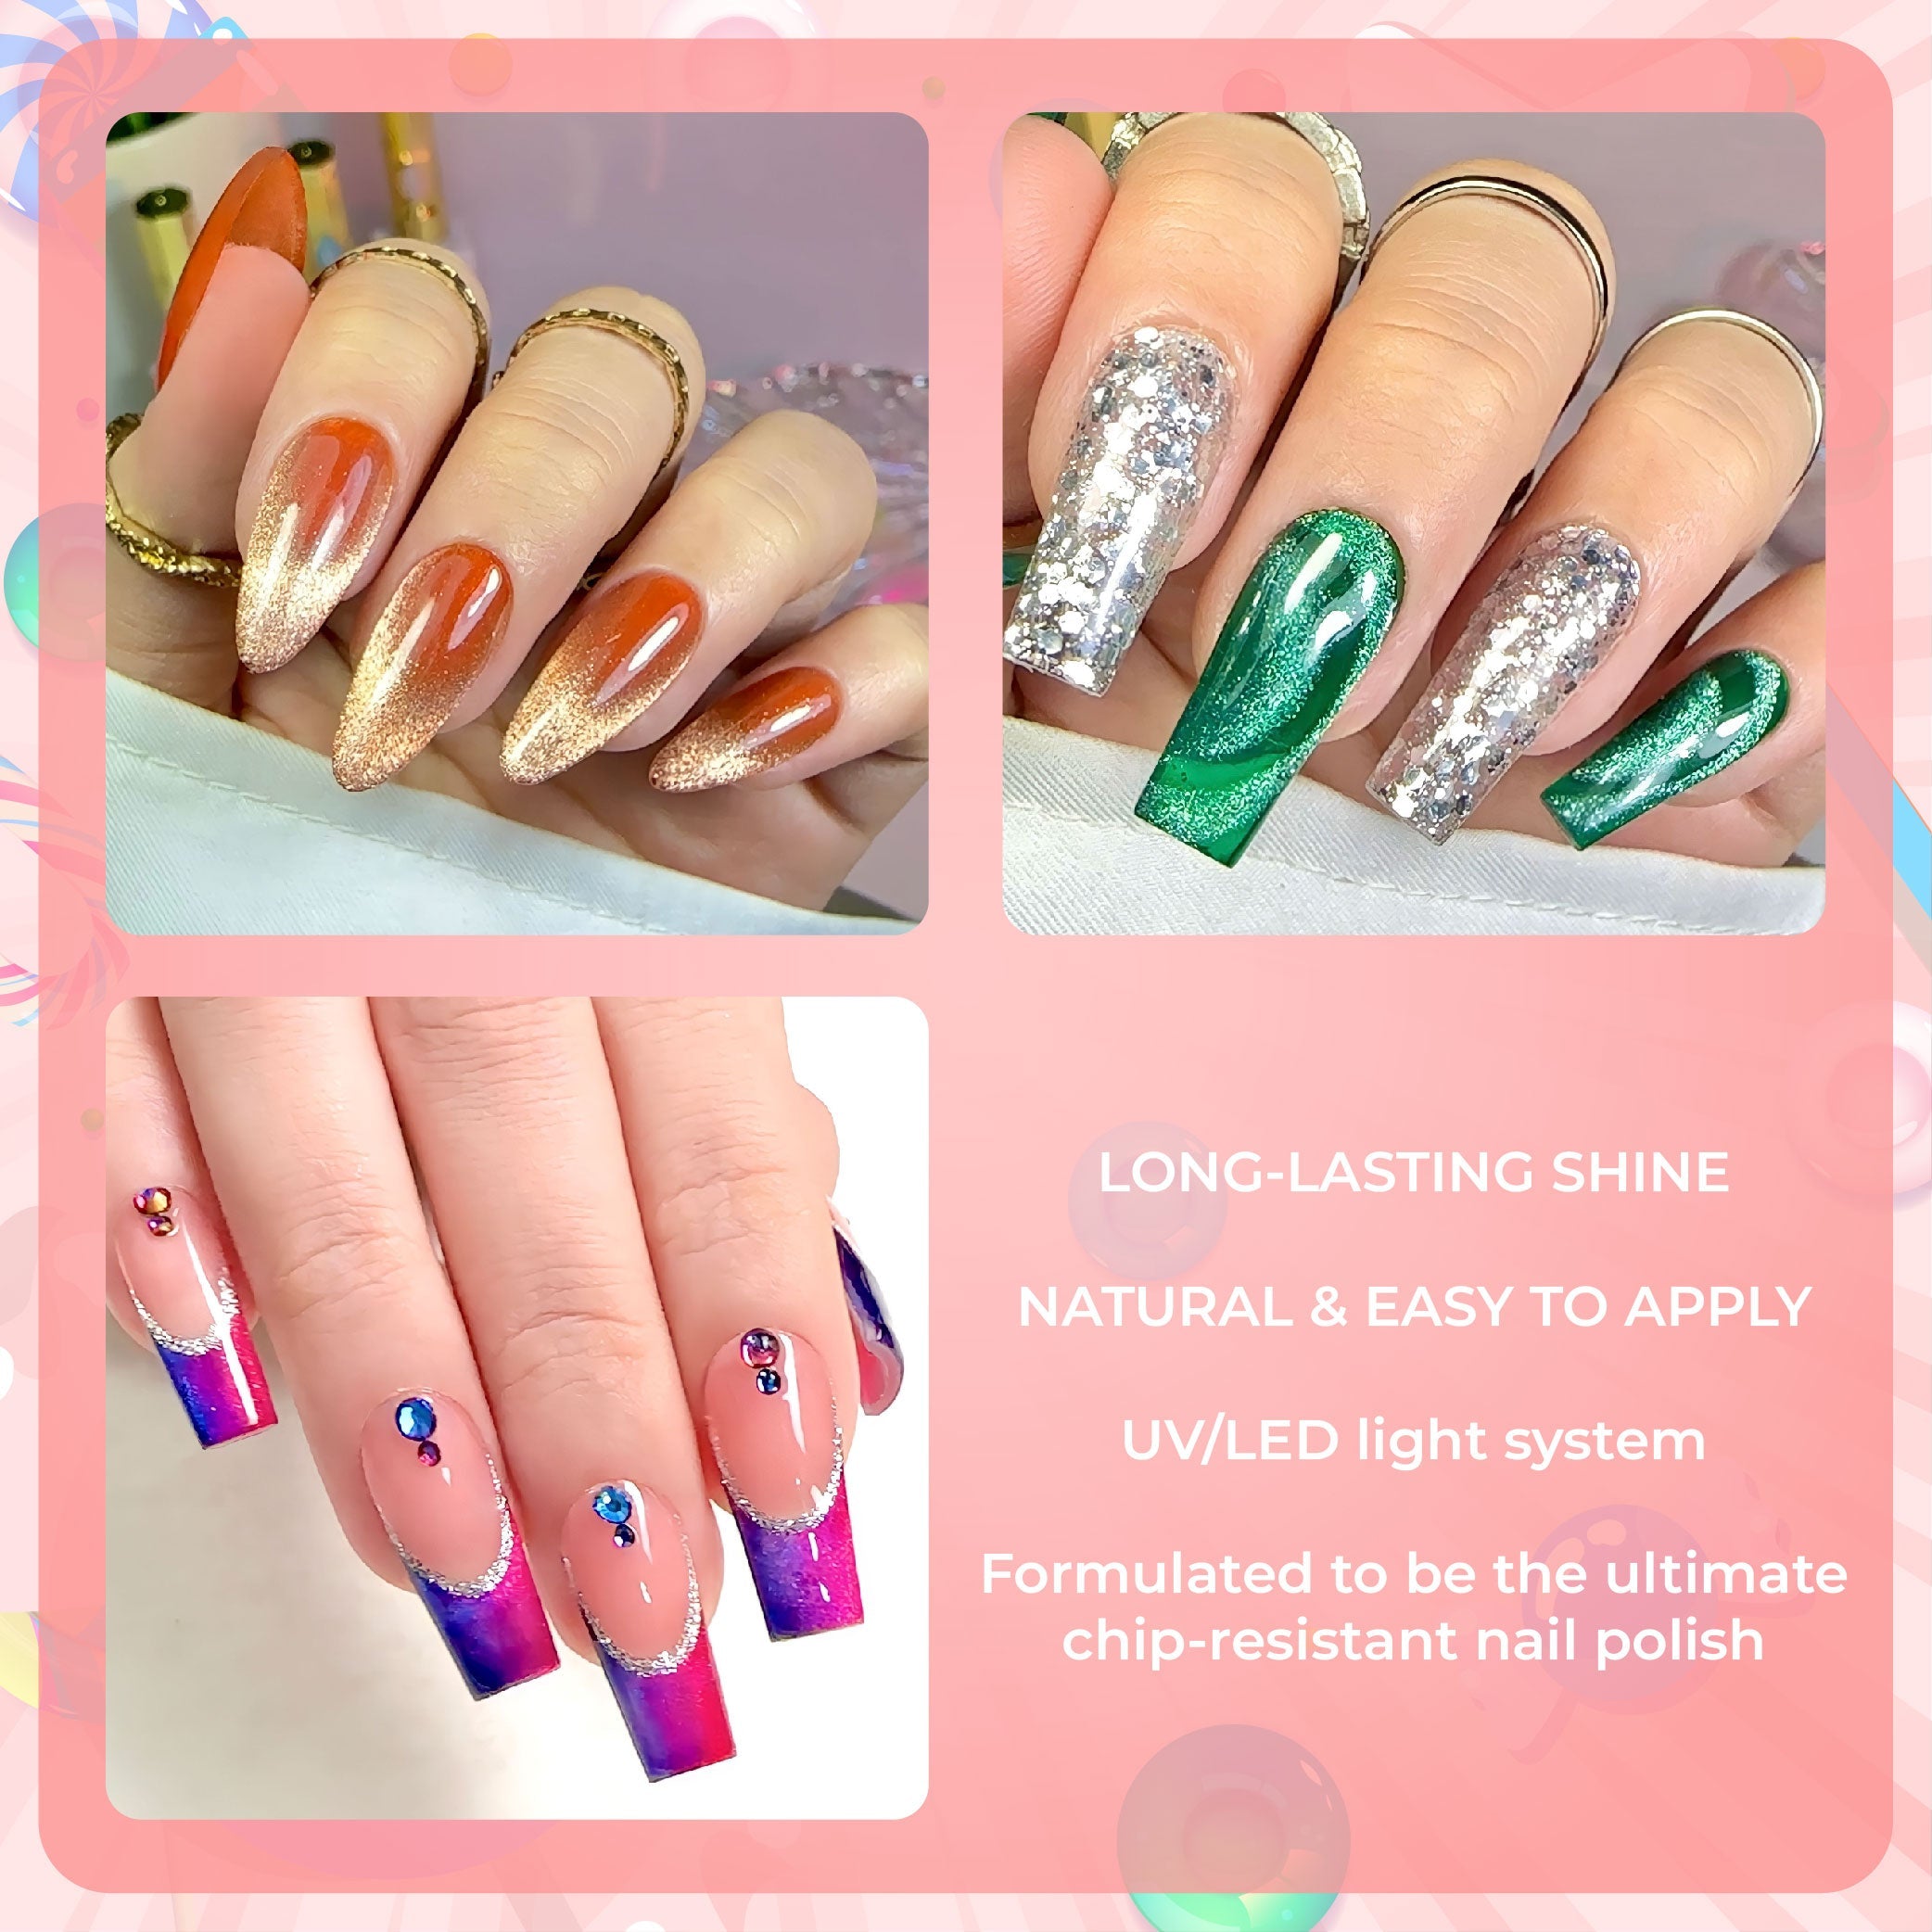 Jelly Gel Polish Colors - Lavis J02-19 - Candy Collection